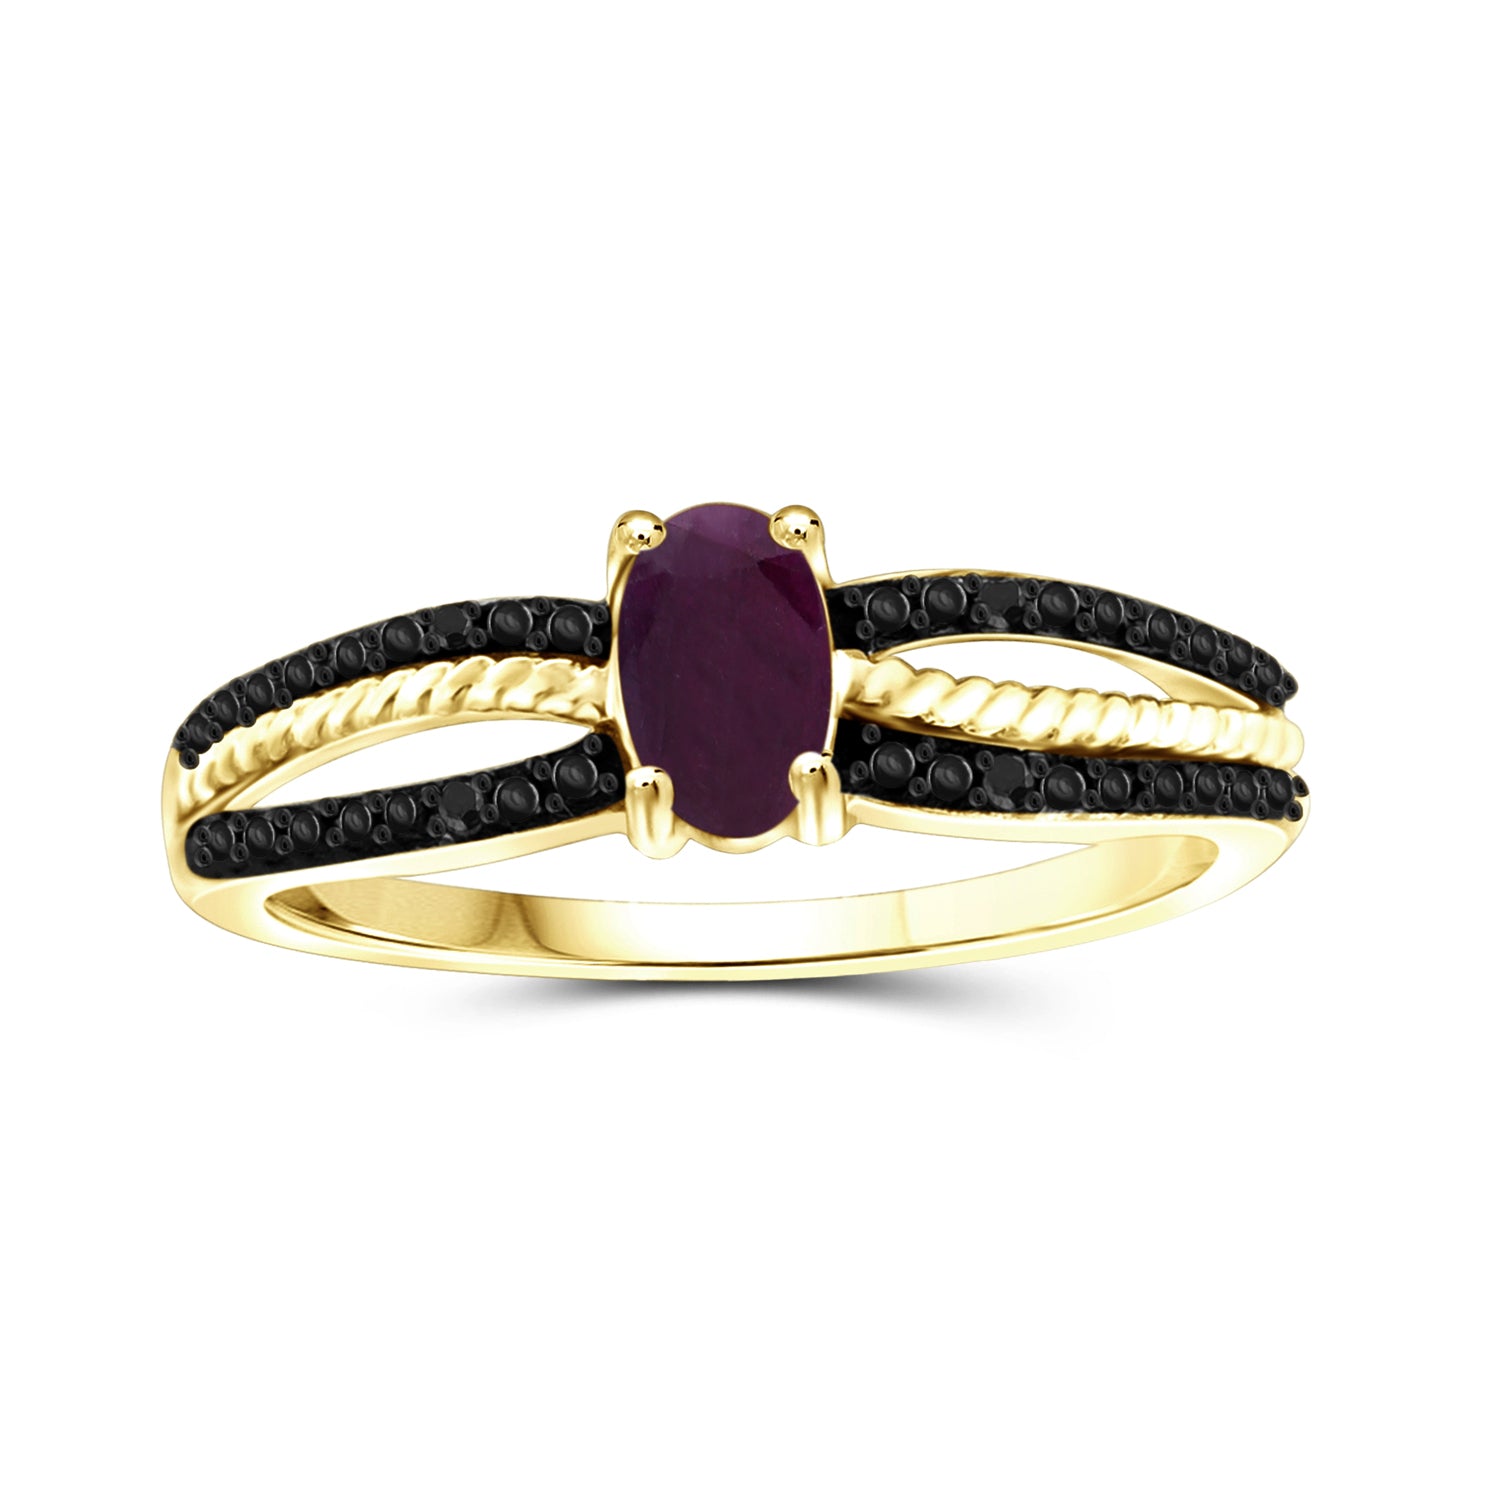 Ruby Ring Birthstone Jewelry – 0.50 Carat Ruby 14K Gold-Plated Ring Jewelry with Black Diamond Accent – Gemstone Rings with Hypoallergenic 14K Gold-Plated Band